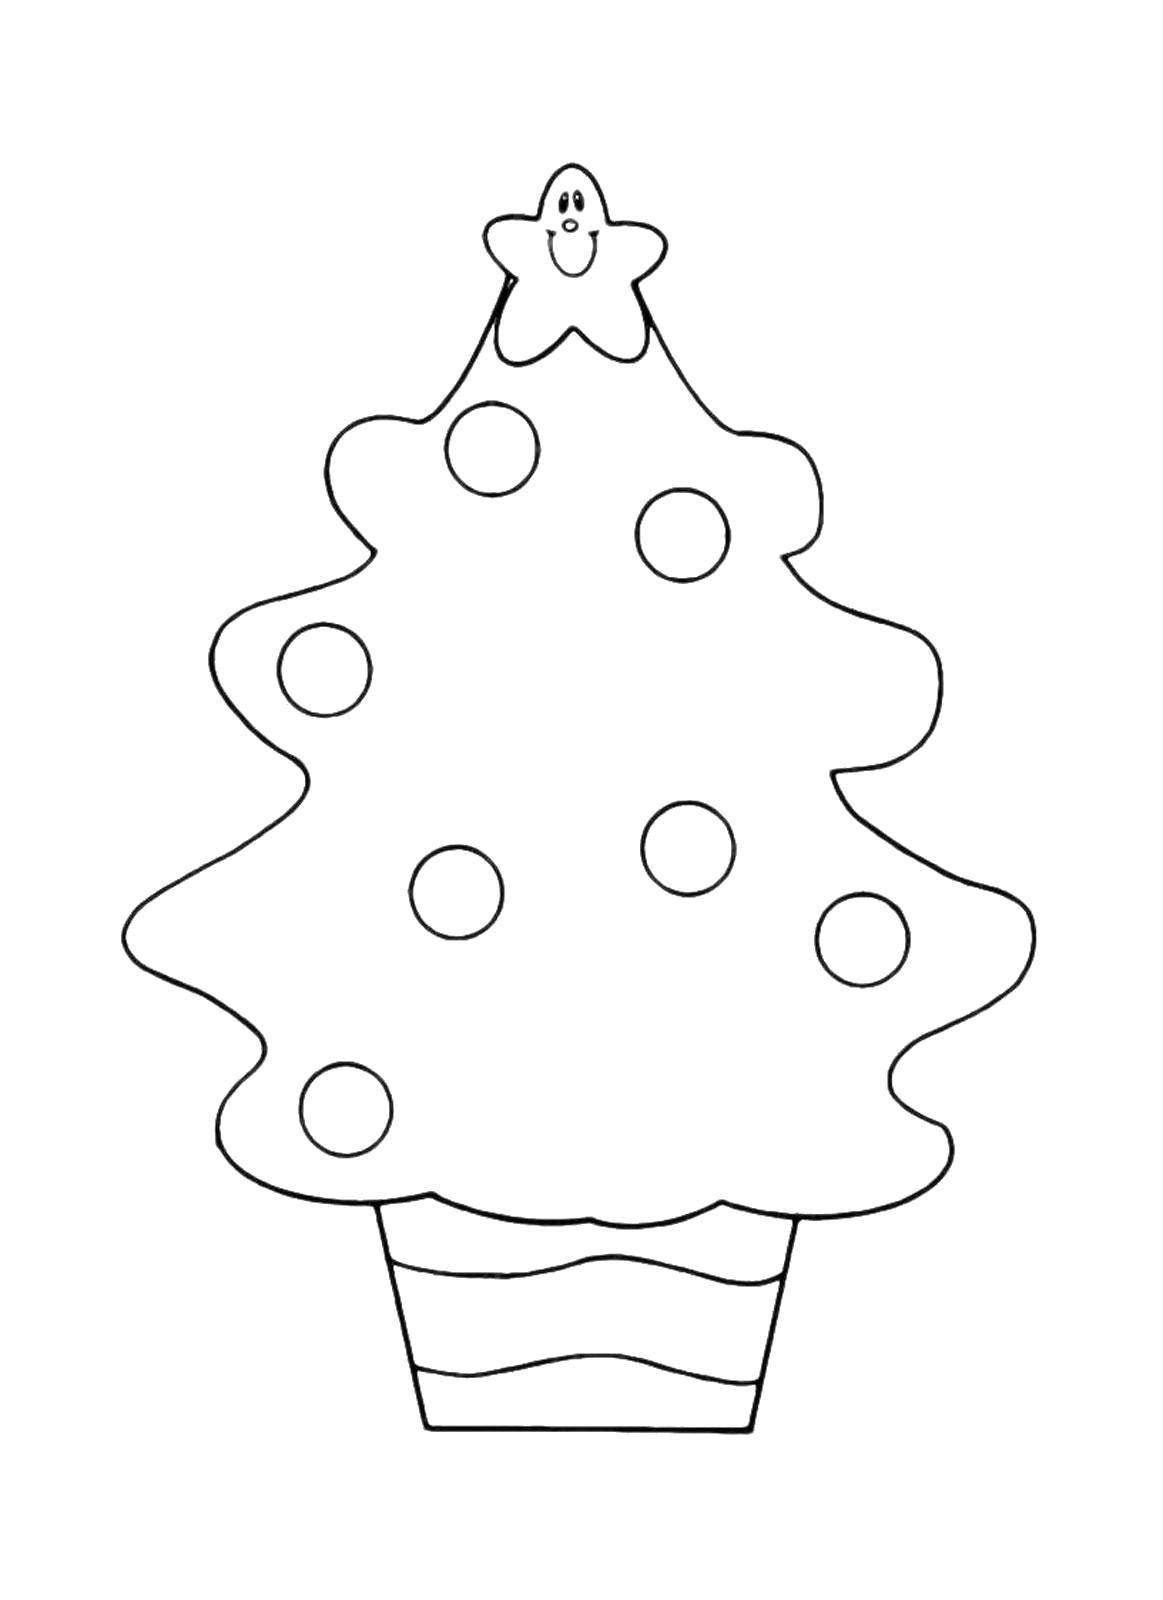 Coloring Sweetheart tree. Category little ones. Tags:  New Year, tree, gifts, toys.